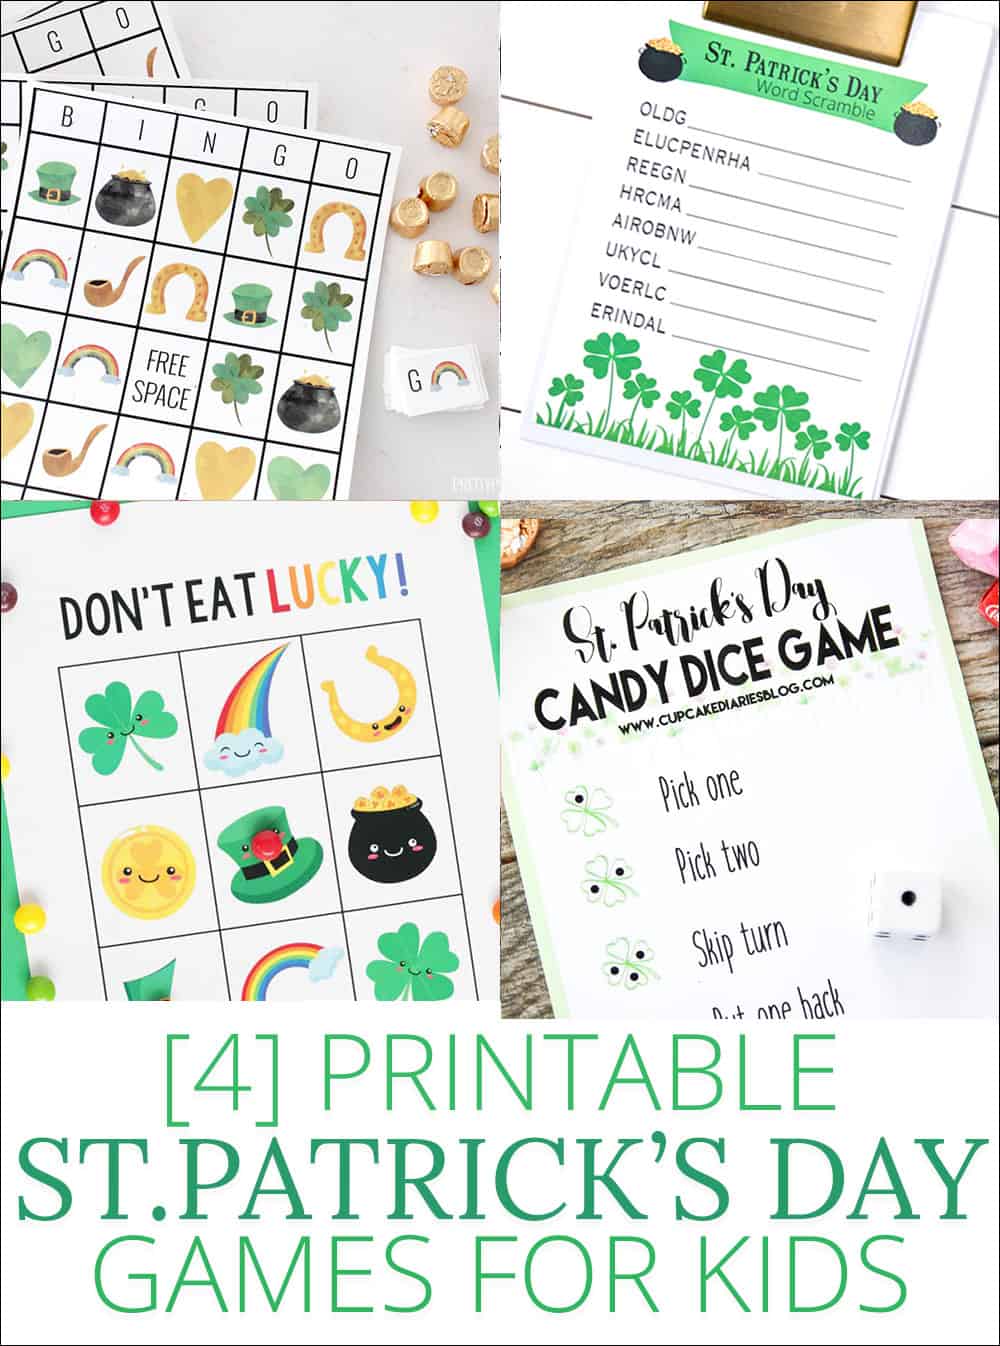 St. Patrick's Day Kids Games - all free printables! These are the perfect way to keep the kids entertained during St. Patrick's Day! #stpatricksday